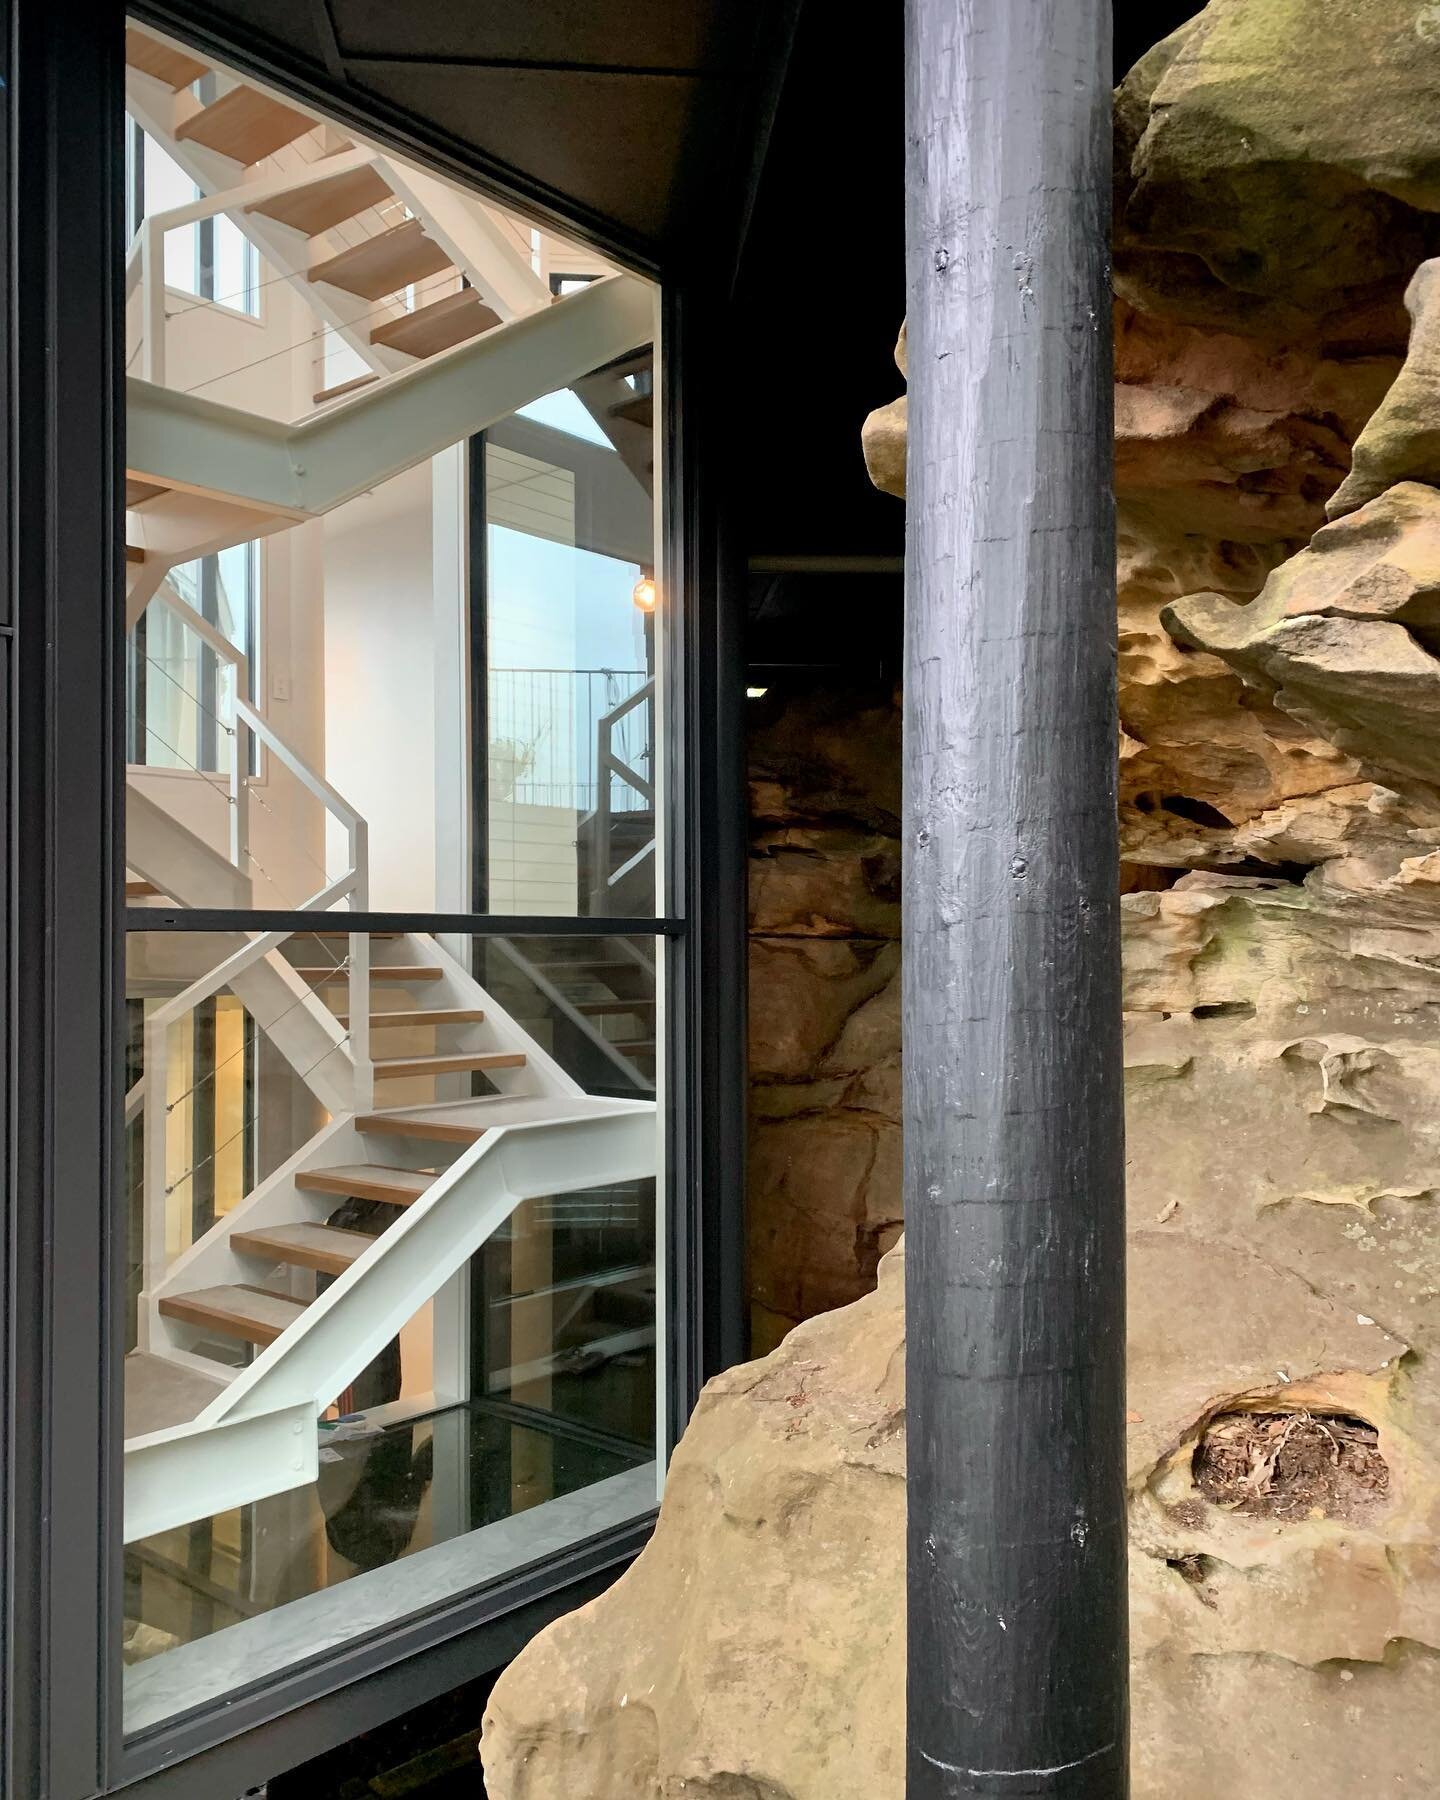 Stone, steel, timber and glass down at Yowie Bay. @buildbydesign.bbd 👏 
Almost there&hellip;

#abstract #composition #cliff #naturalstone #naturevstechnology #architecture #design #sydney #sutherlandshirearchitect #sydneyarchitect #balance #monument